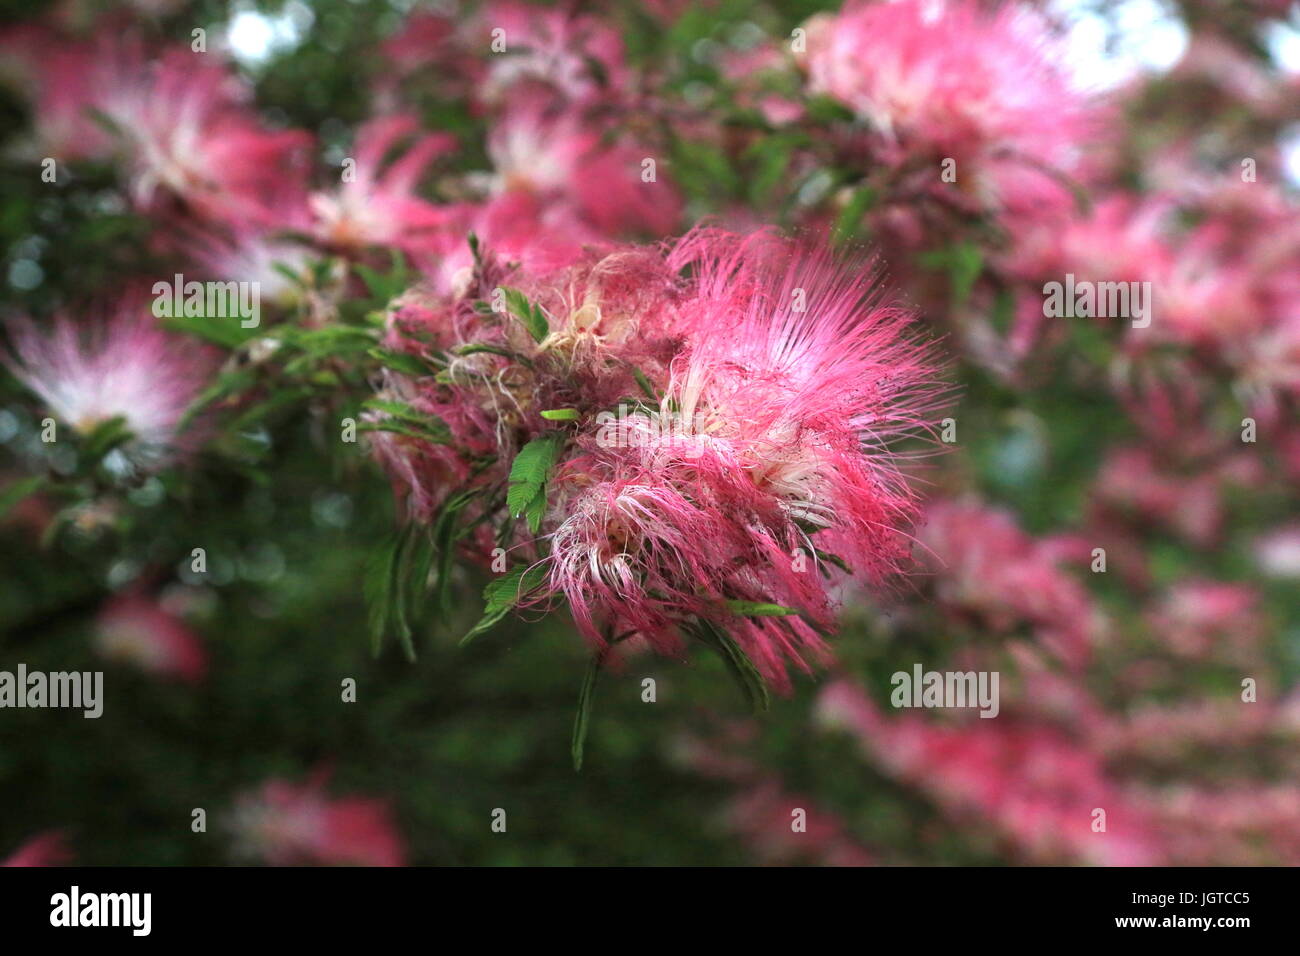 A Persian silk tree in bloom in Yamato, Japan.  In the U.S., these trees are often refered to as a type of Mimosa. Stock Photo